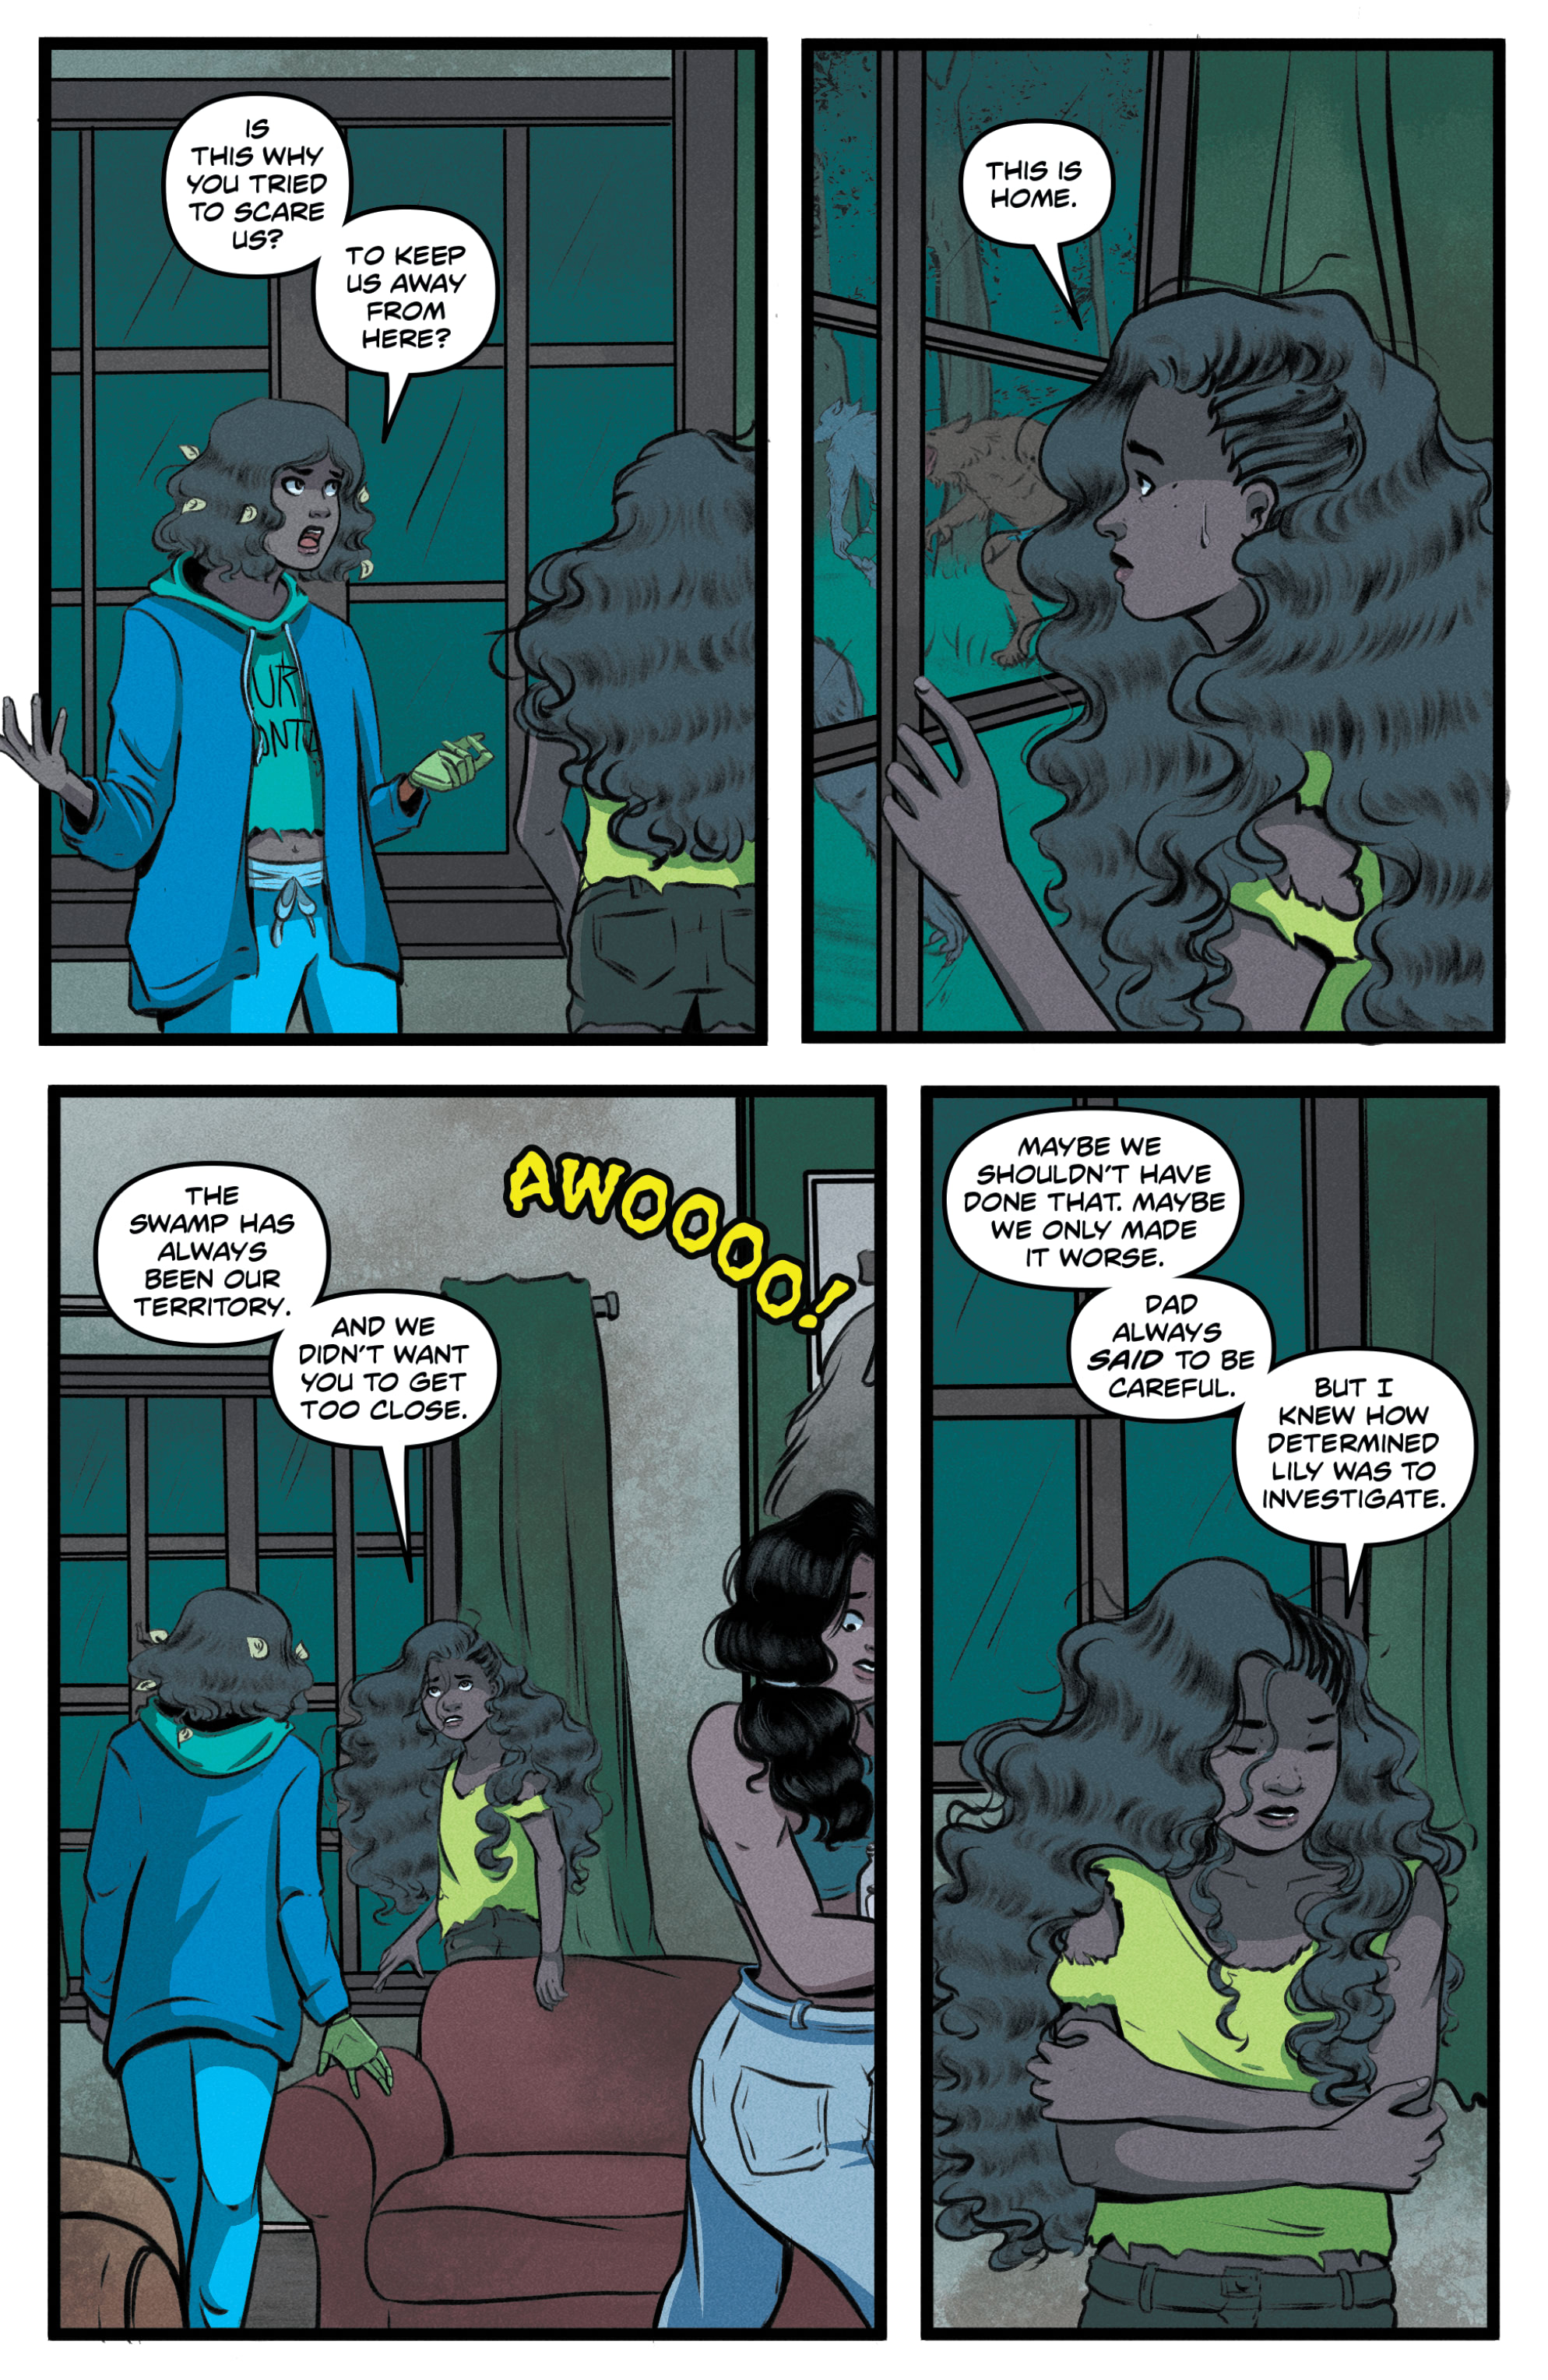 Goosebumps: Secrets of the Swamp (2020-): Chapter 4 - Page 4